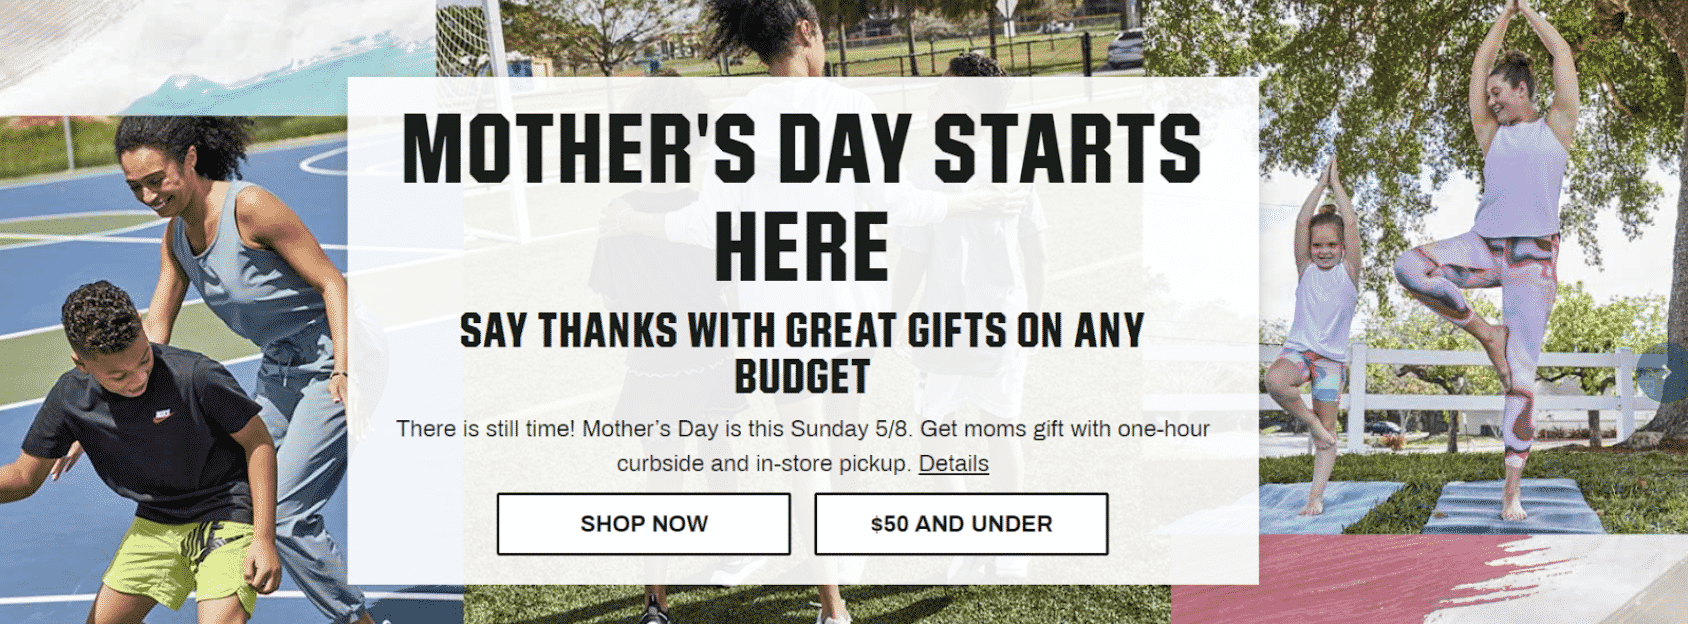 Mother's day advertising example